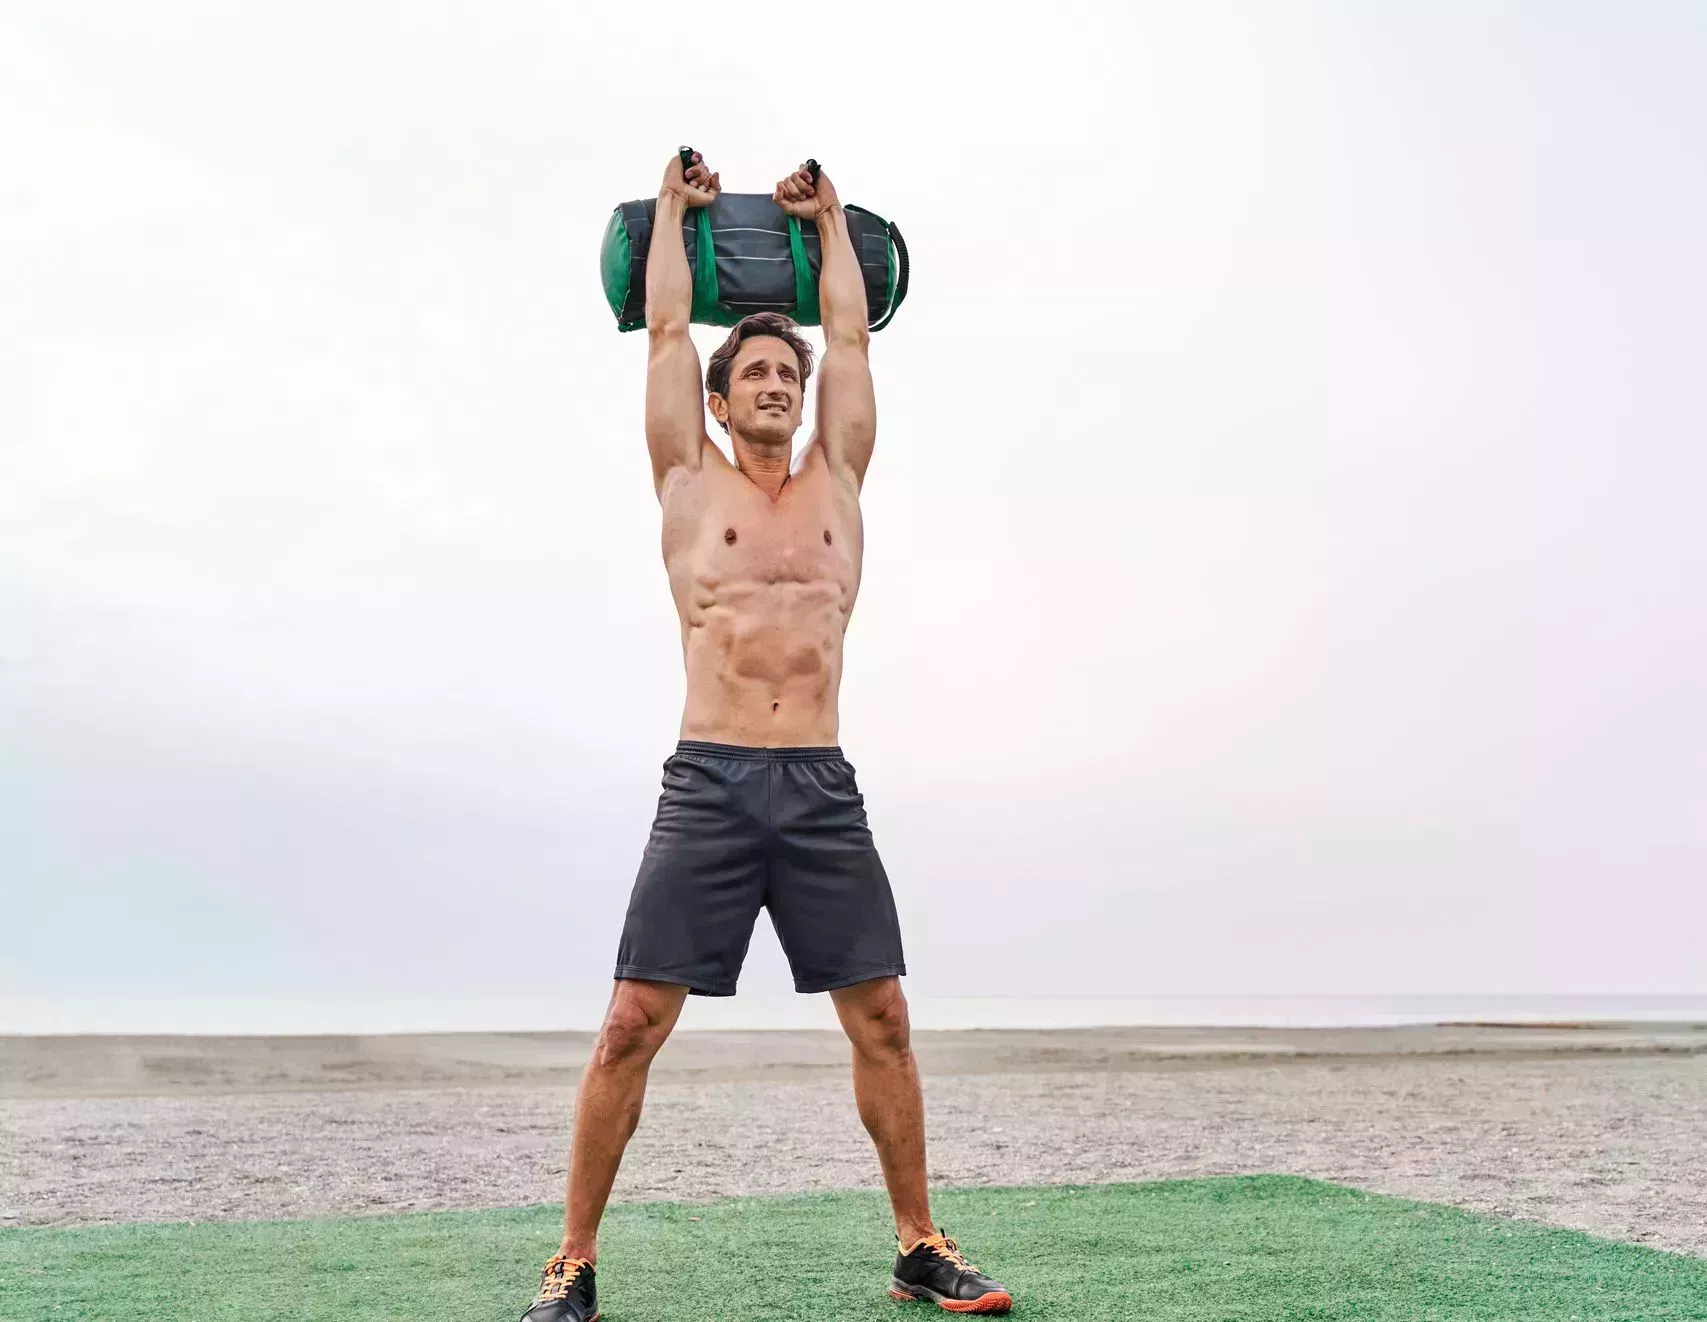 young muscular man training on the beach shirtless doing a overhead front squat lifting a sandbag